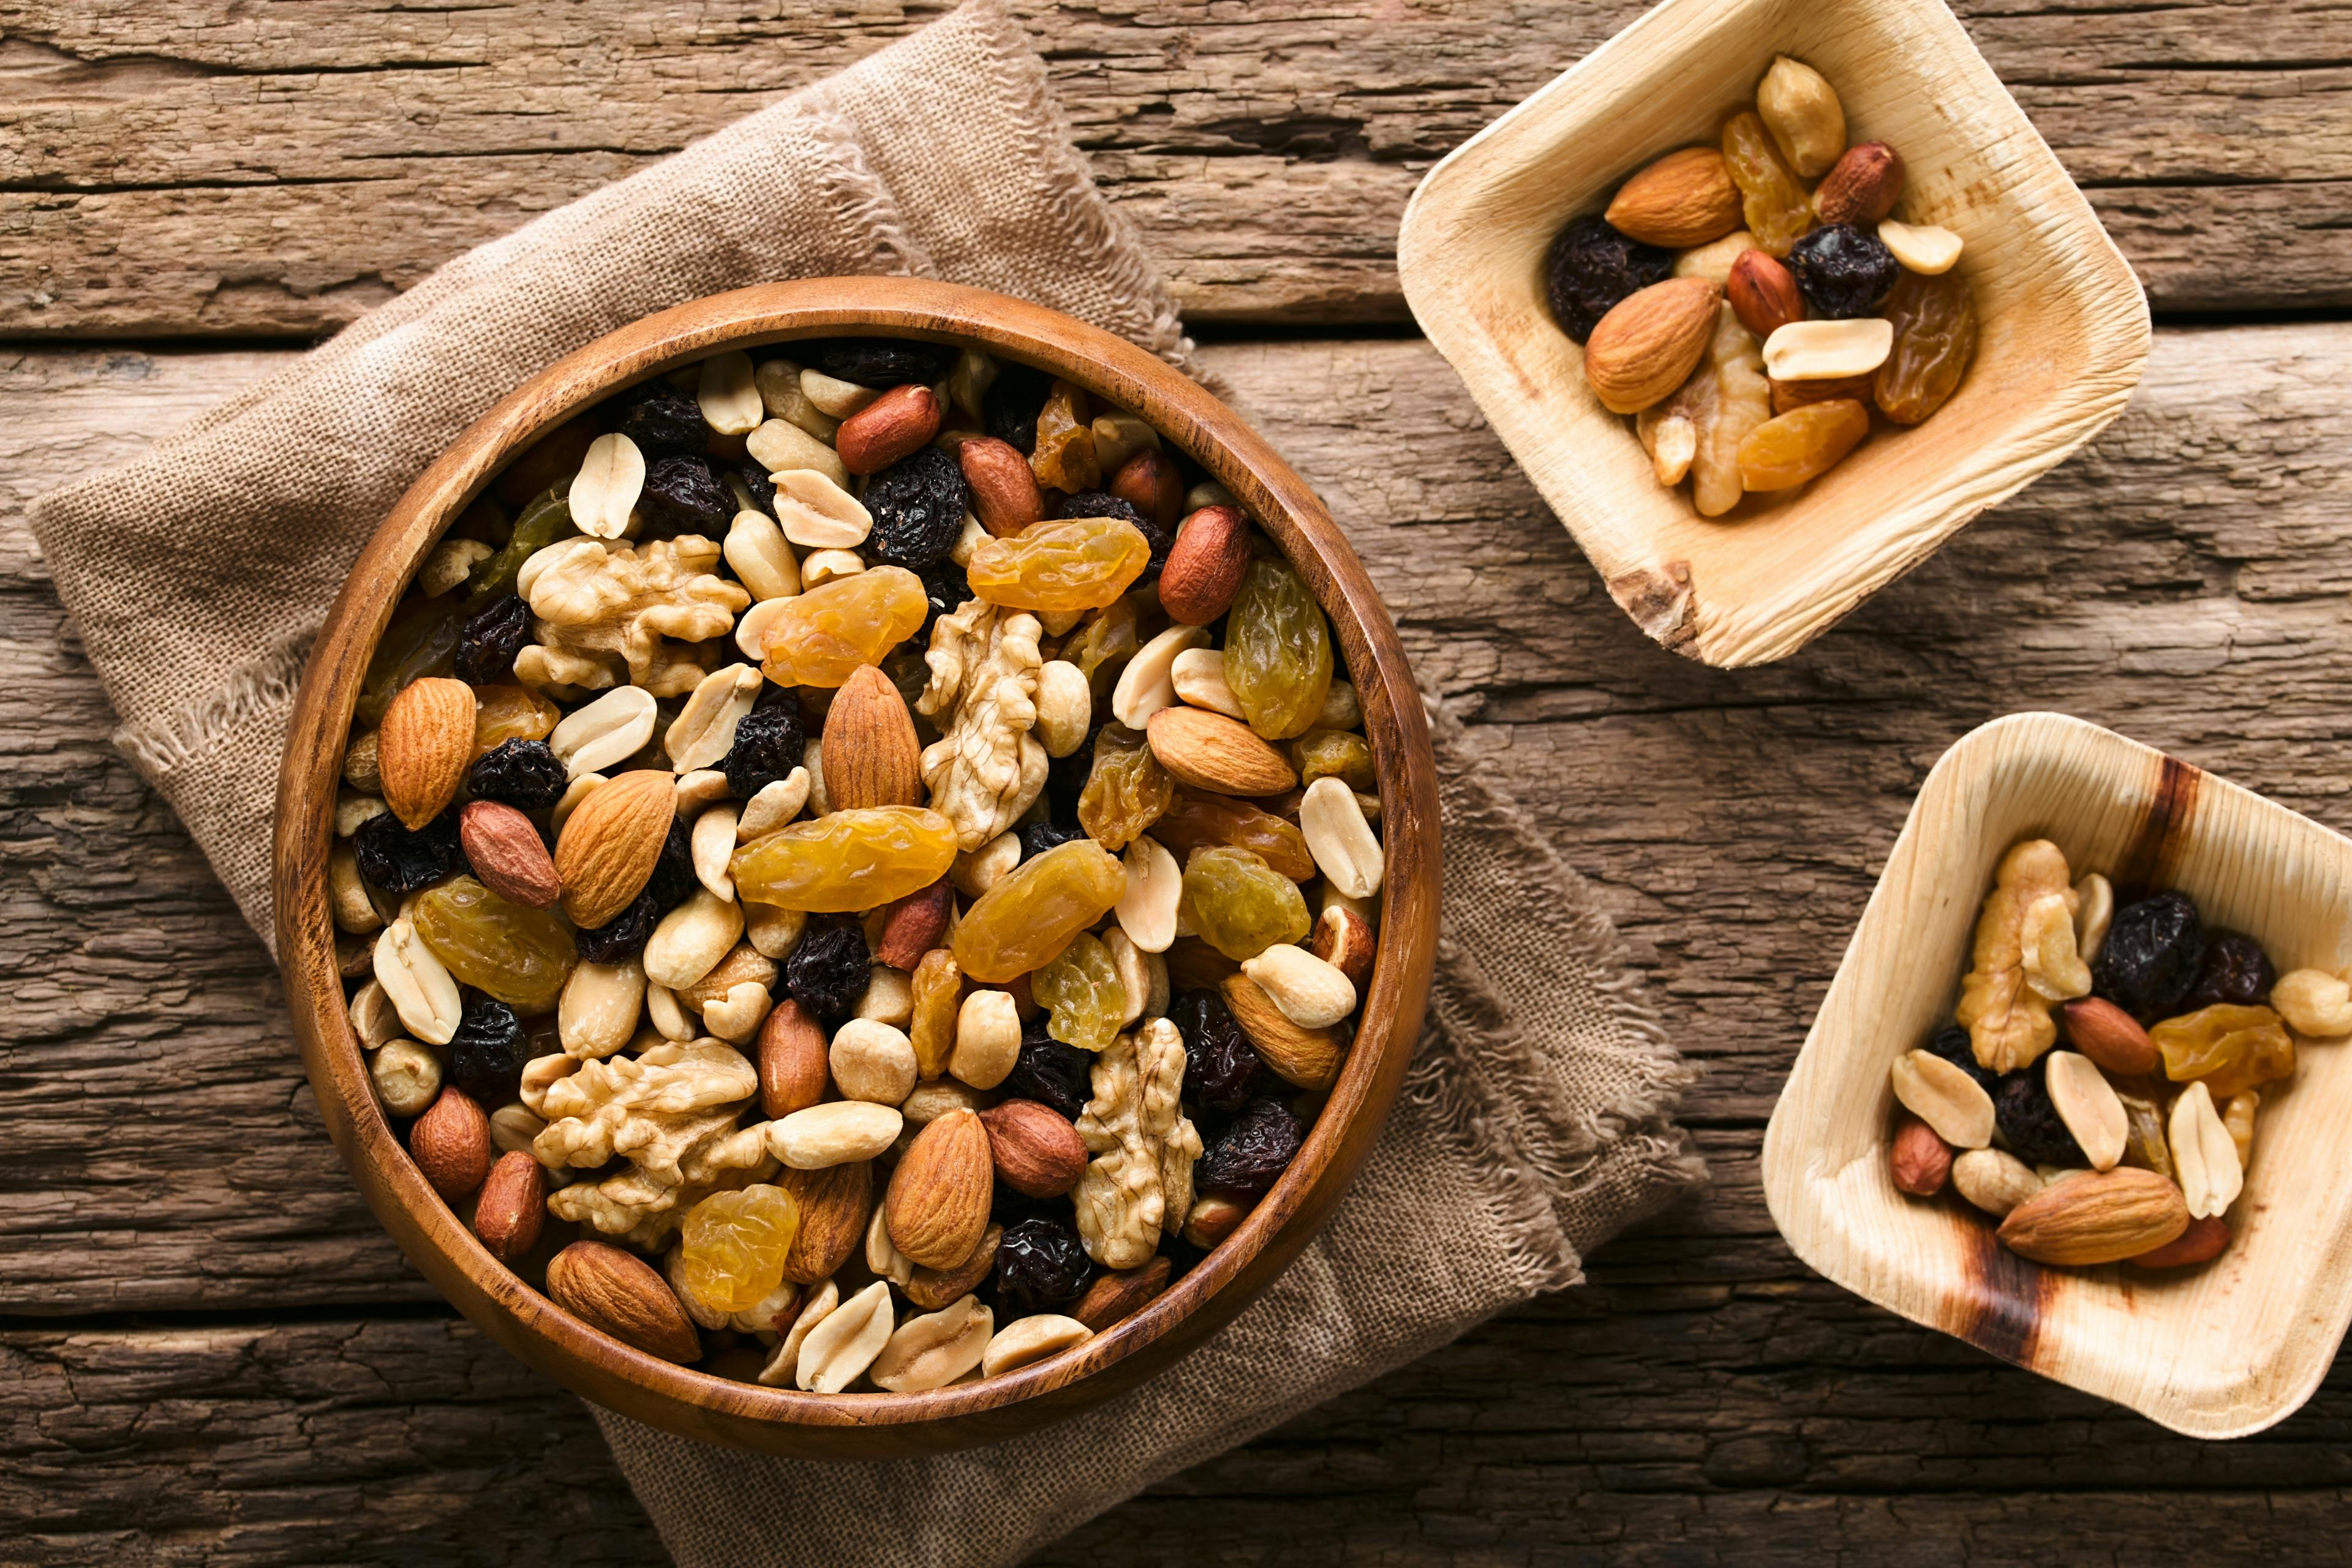 Healthy trail mix snack made of nuts (walnut, almond, peanut) and dried fruits (raisin, sultana) in wooden bowl, photographed overhead (Selective Focus, Focus on the trail mix in the big bowl) See Less